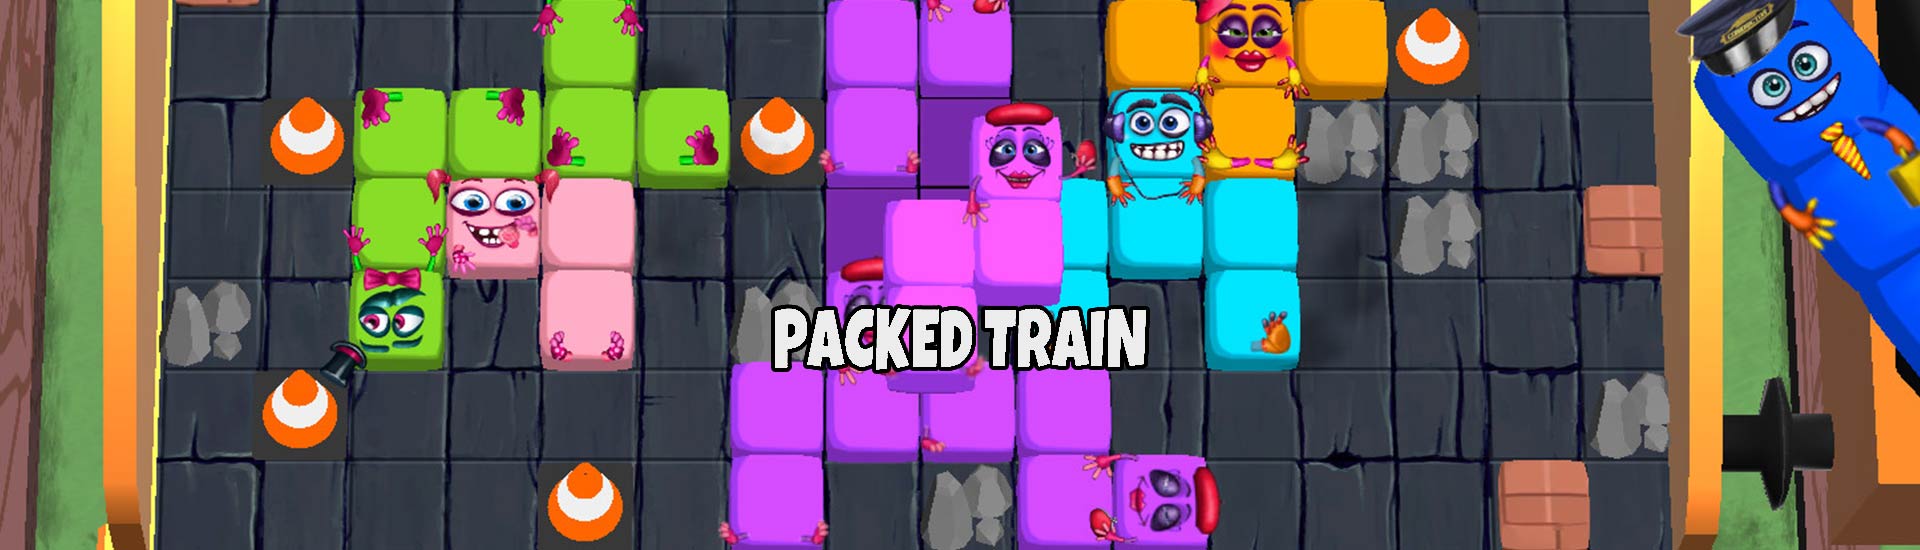 packed-train-[pc-game]